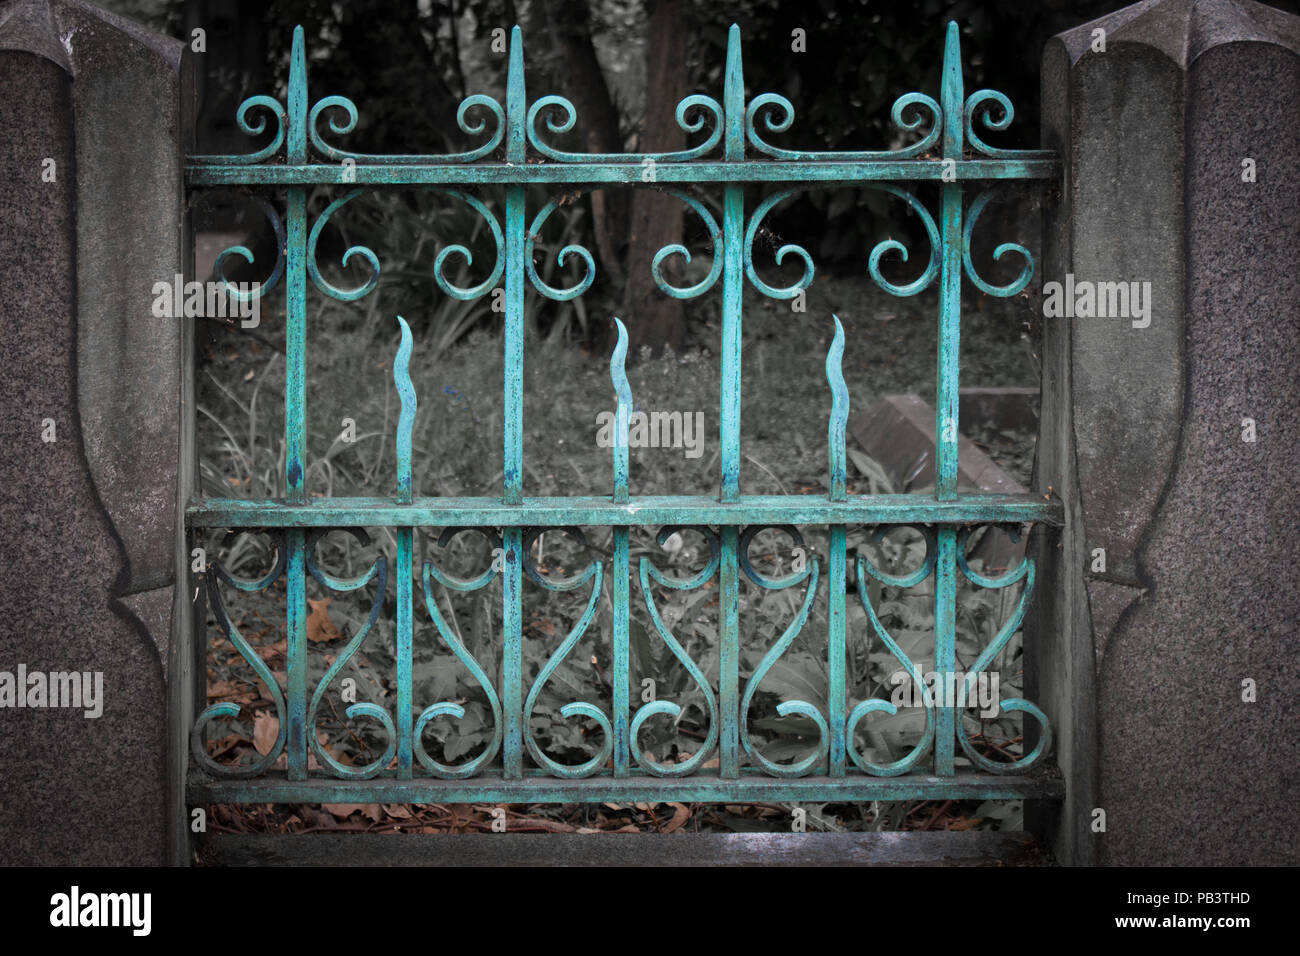 A gate turned turquoise by age in Brompton Cemetery, London, England, UK, Europe. Stock Photo